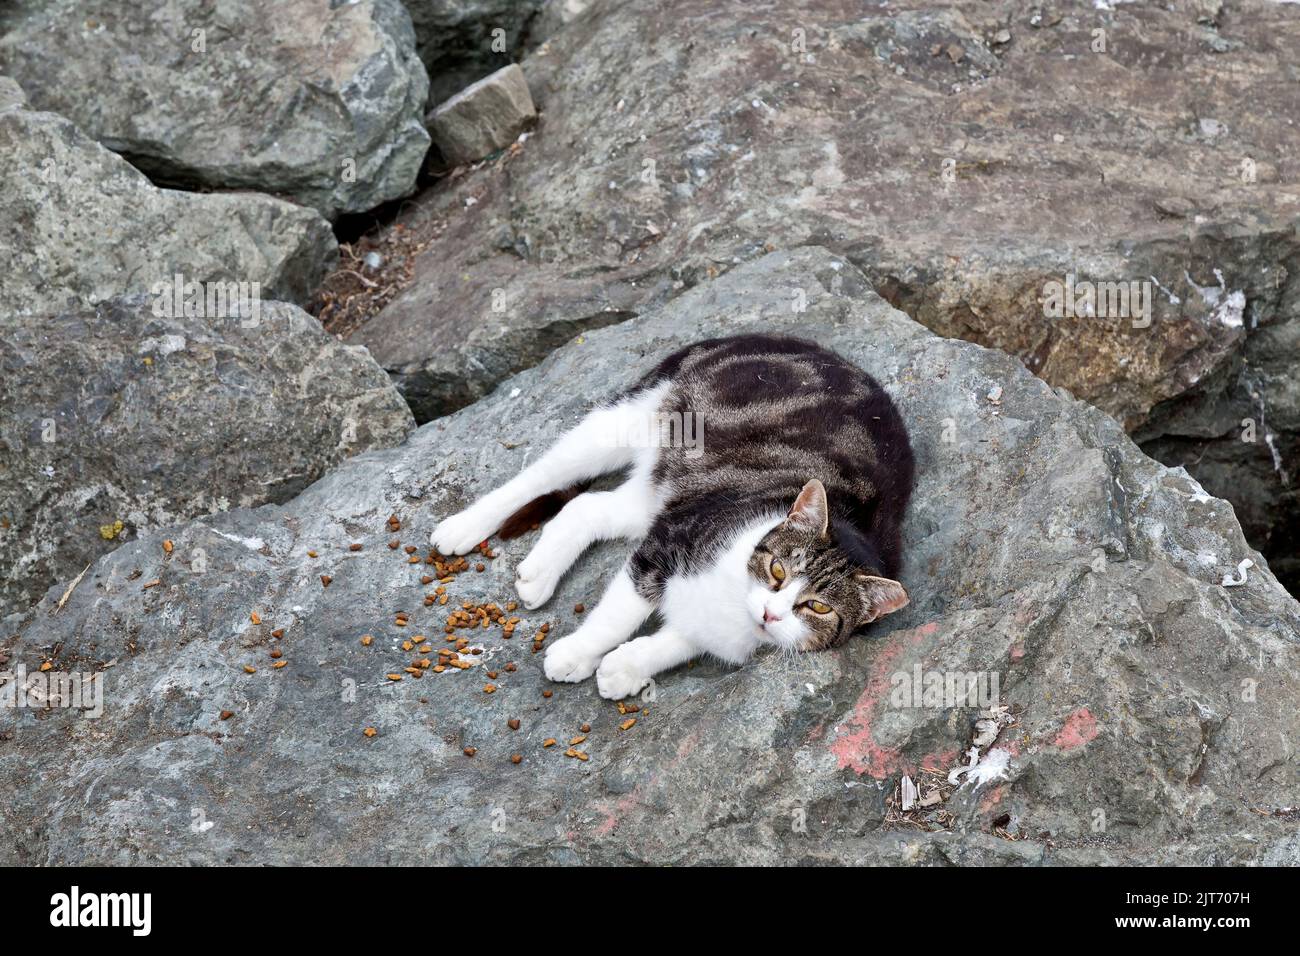 Abandoned, homeless, neglected cat  'Felis catus'  (house cat), donated dry cat food, resting along reinforcement rocks, boat harbor. Stock Photo